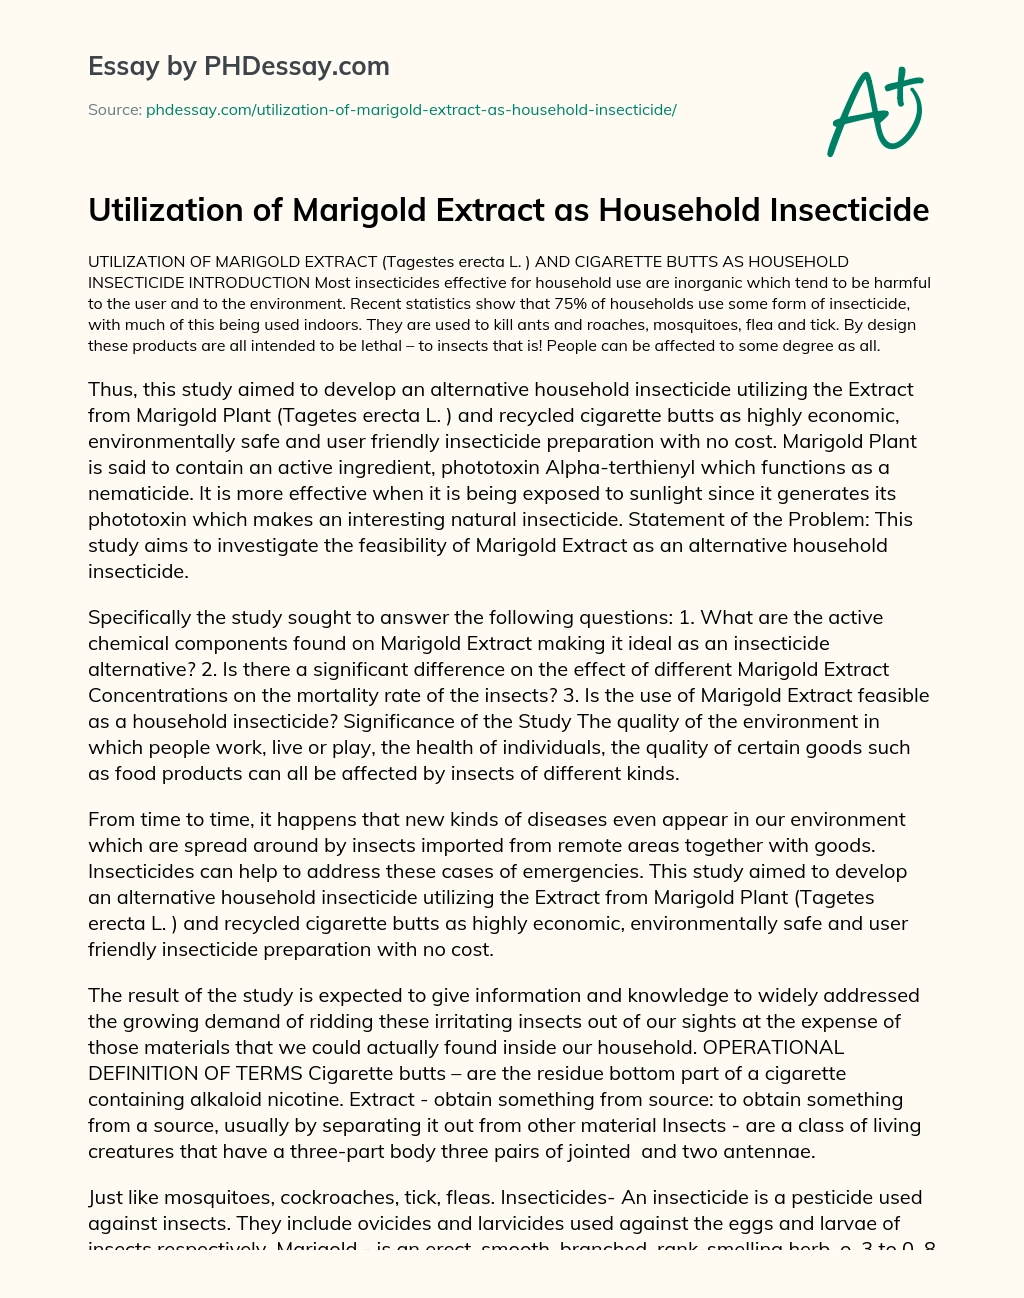 Utilization of Marigold Extract as Household Insecticide essay